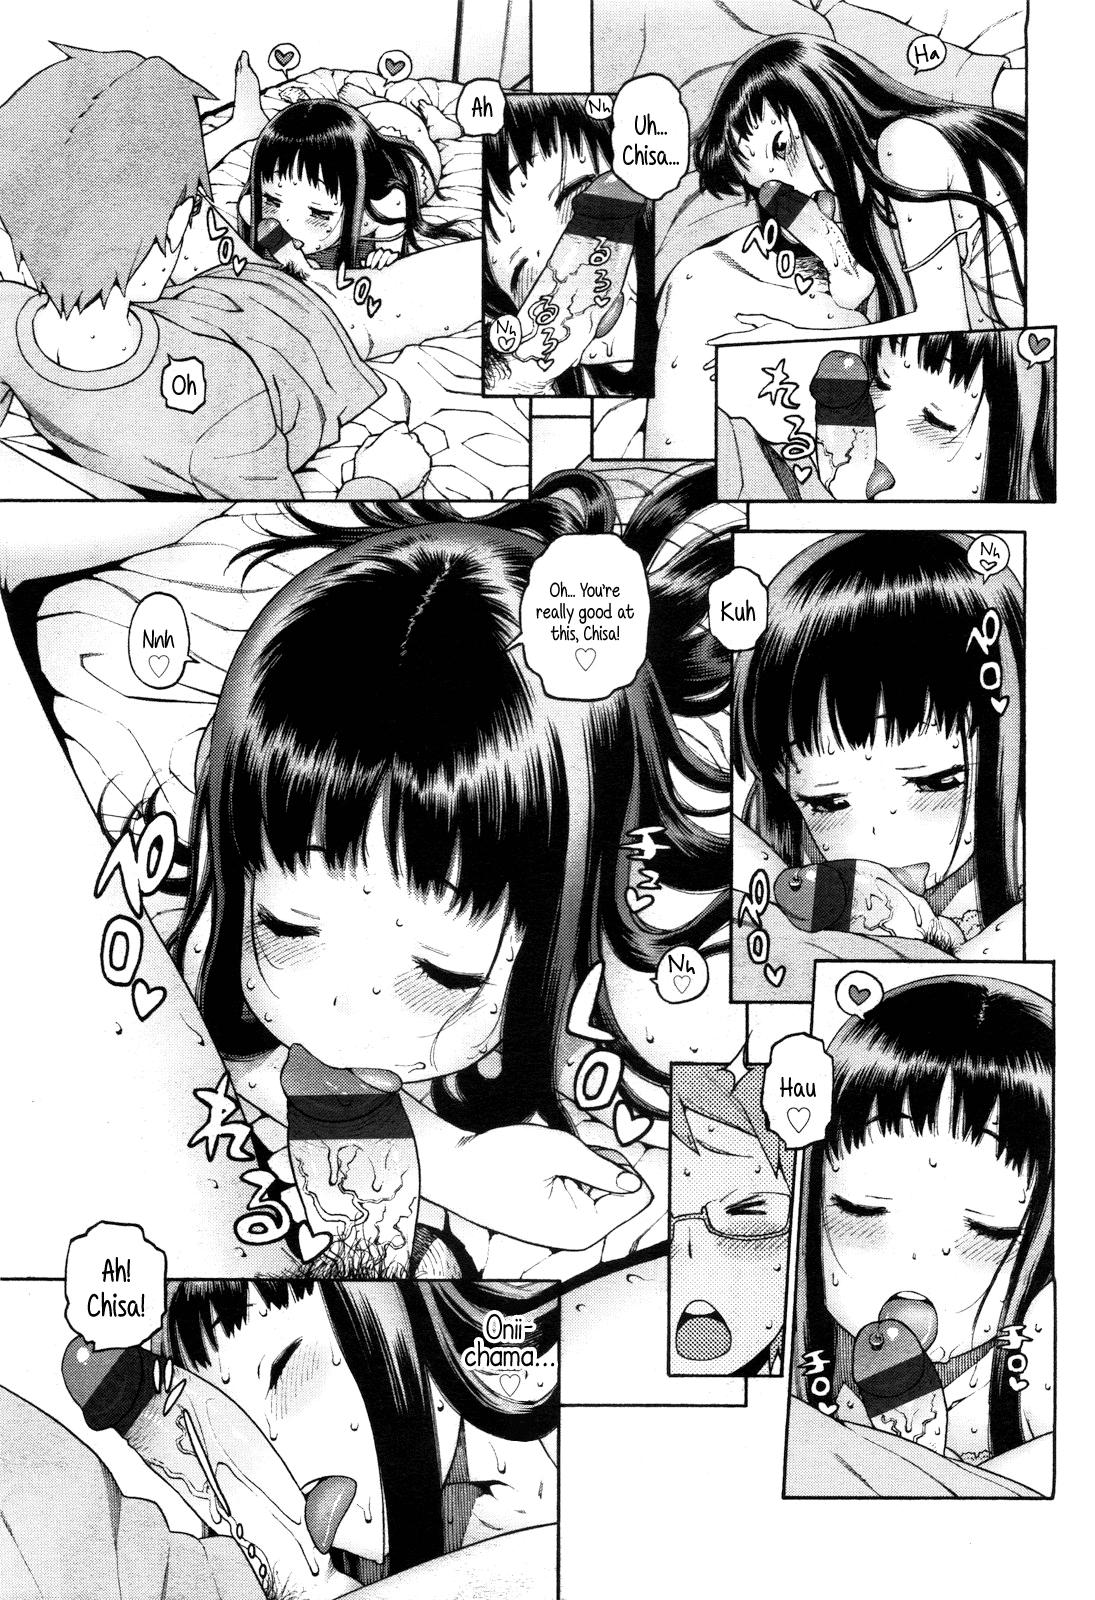 Leite Chisa to Oniichama | Chisa and Onii-chama Titfuck - Page 11